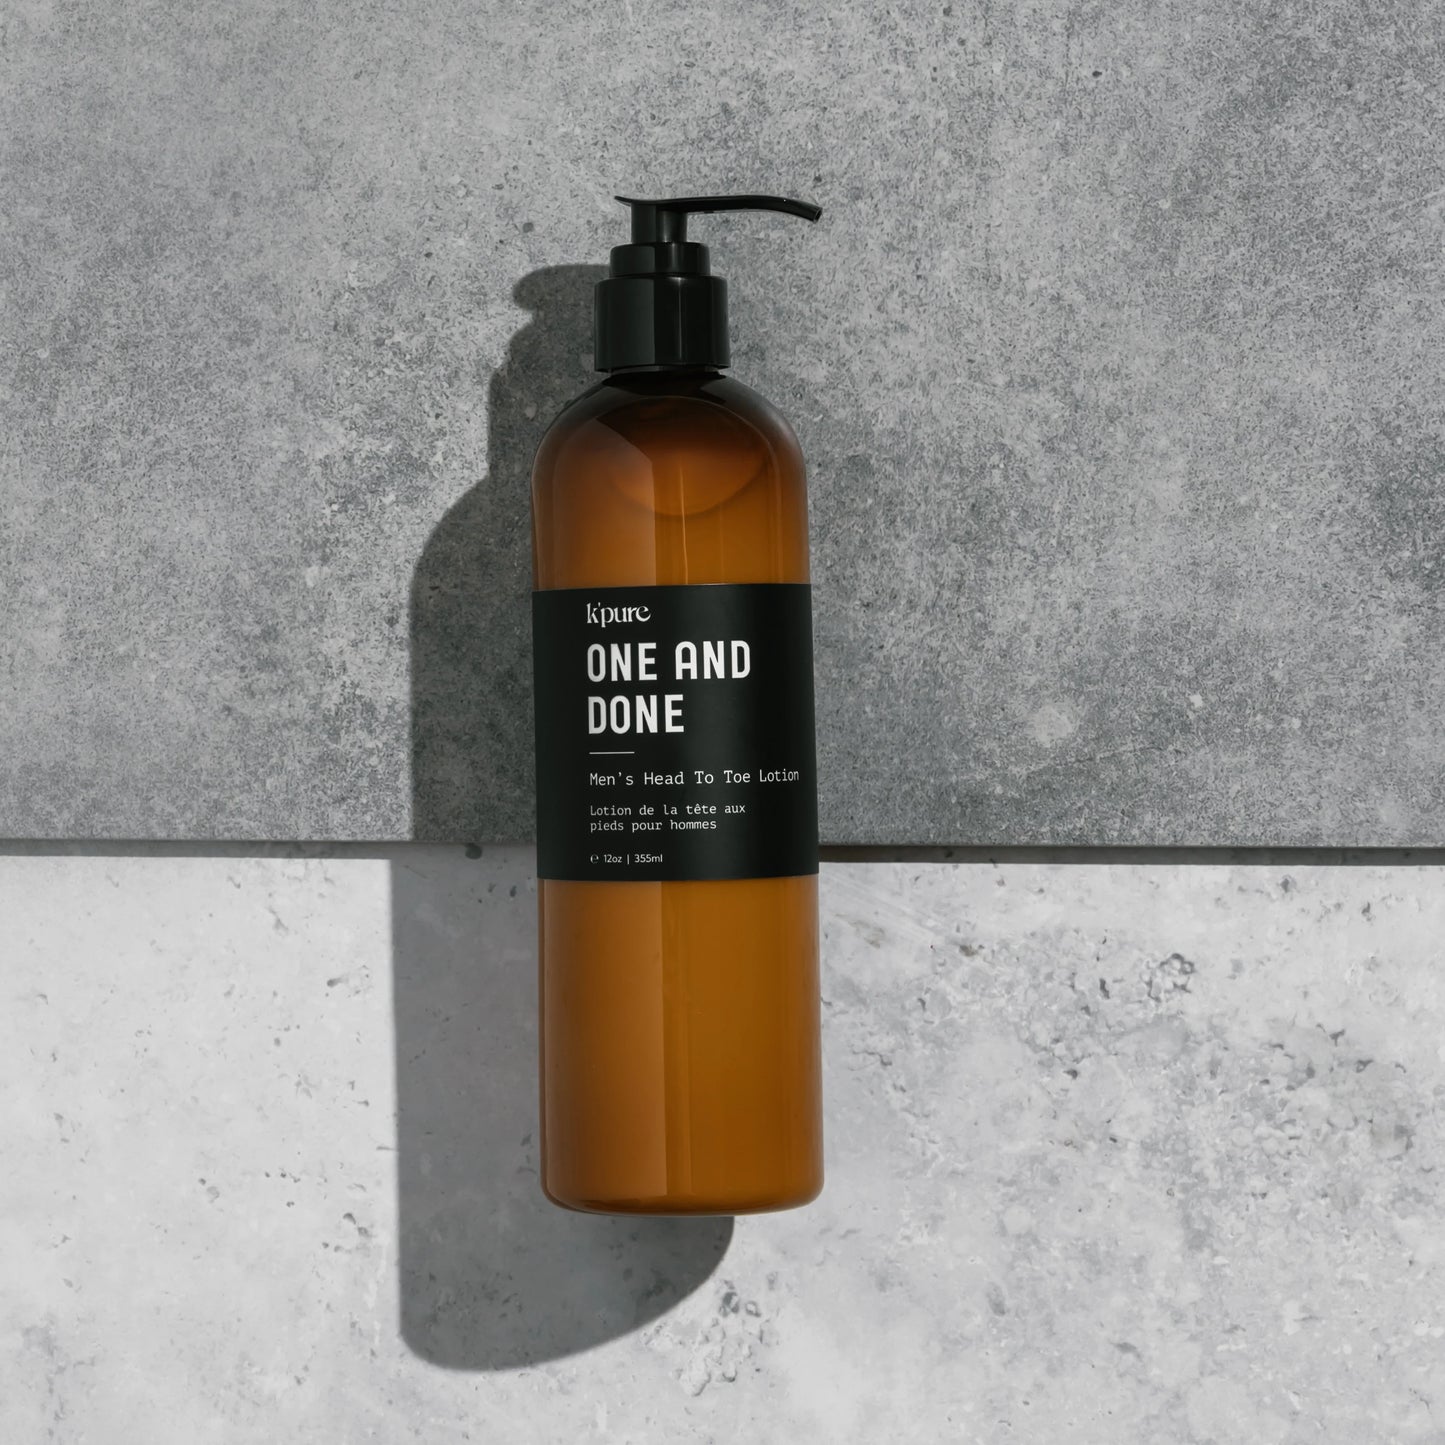 One and Done - Mens Head to Toe Lotion